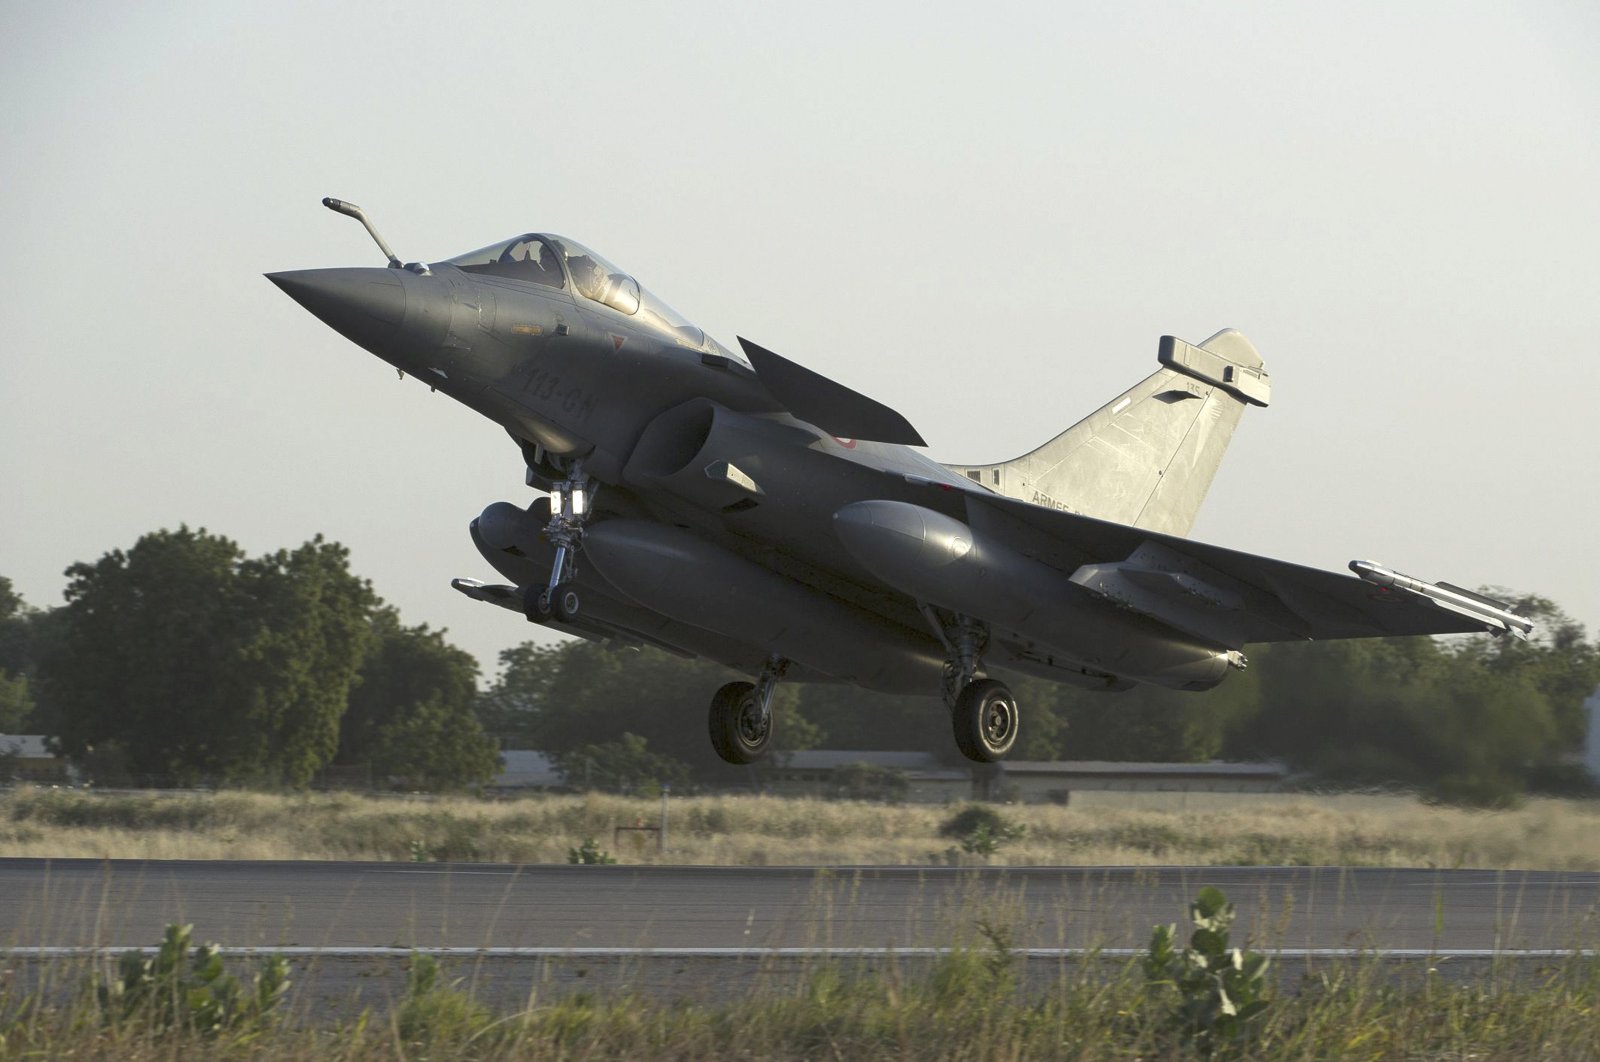 A French Rafale fighter jet lands in Ndjamena, Chad before being deployed in Mali, in this picture provided by the French Military Communications Audiovisual office (ECPAD) and taken on Jan. 13, 2013. (Military Politics Transport via Reuters)